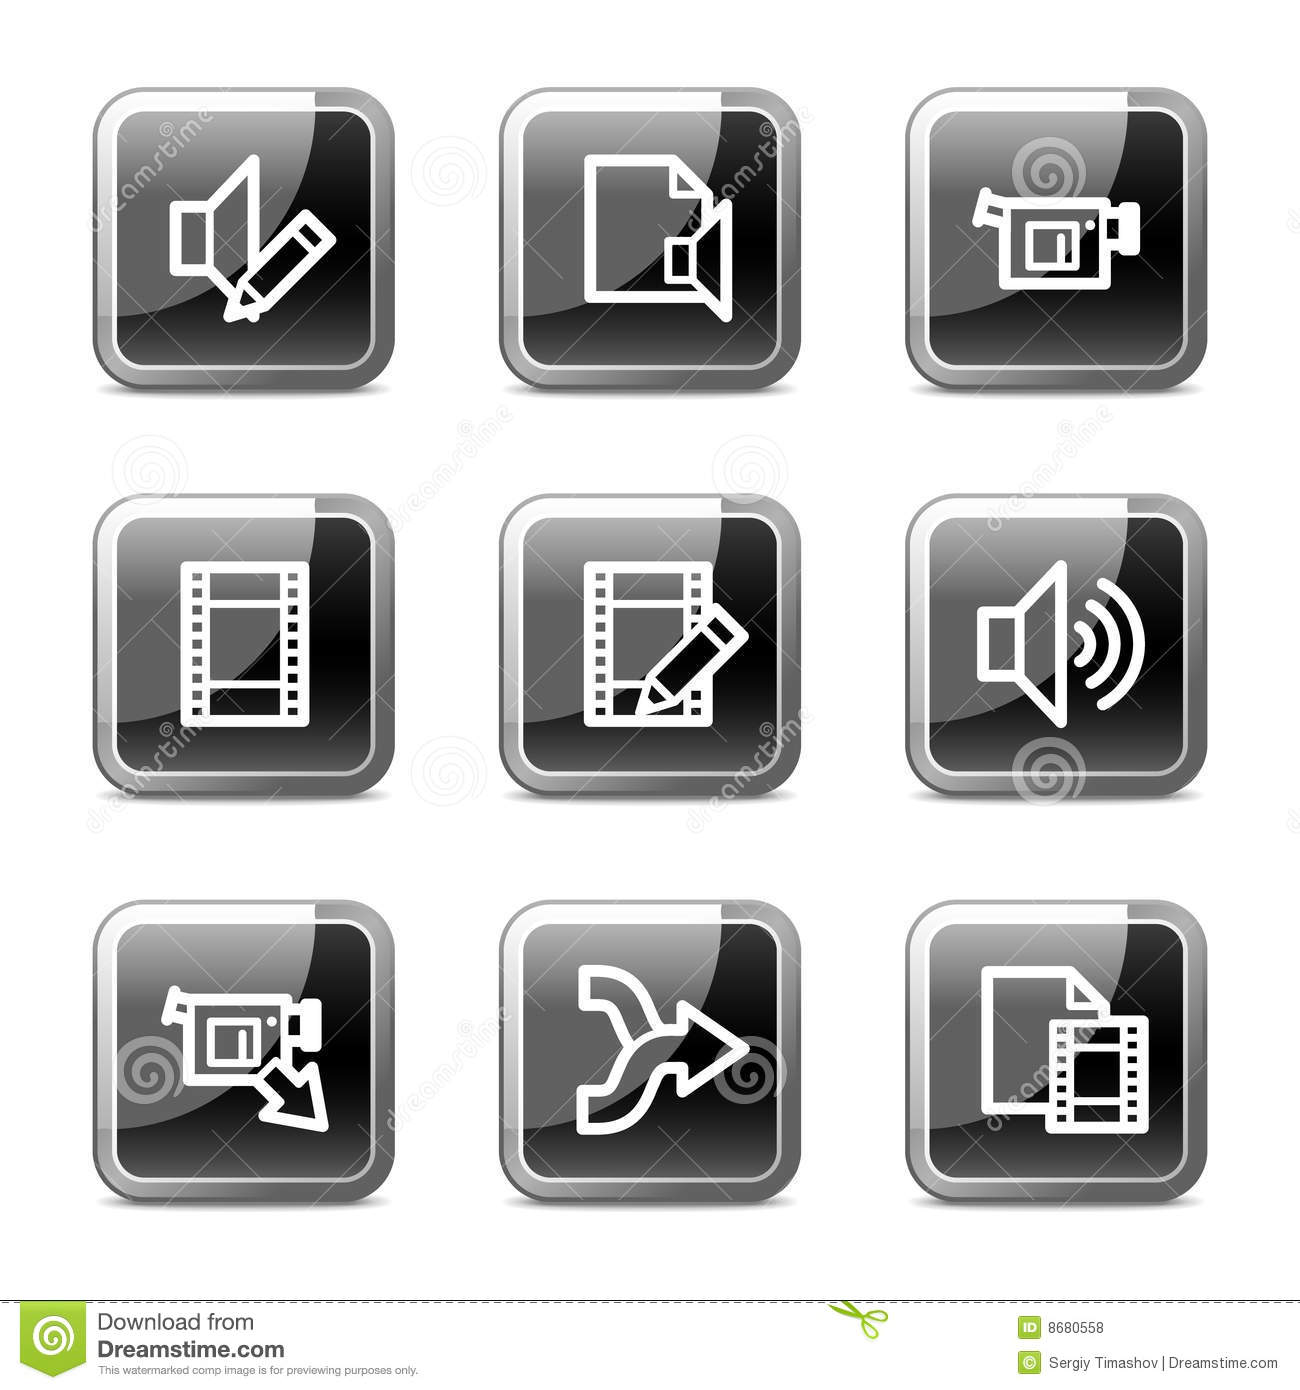 Edit Button Icons for Websites